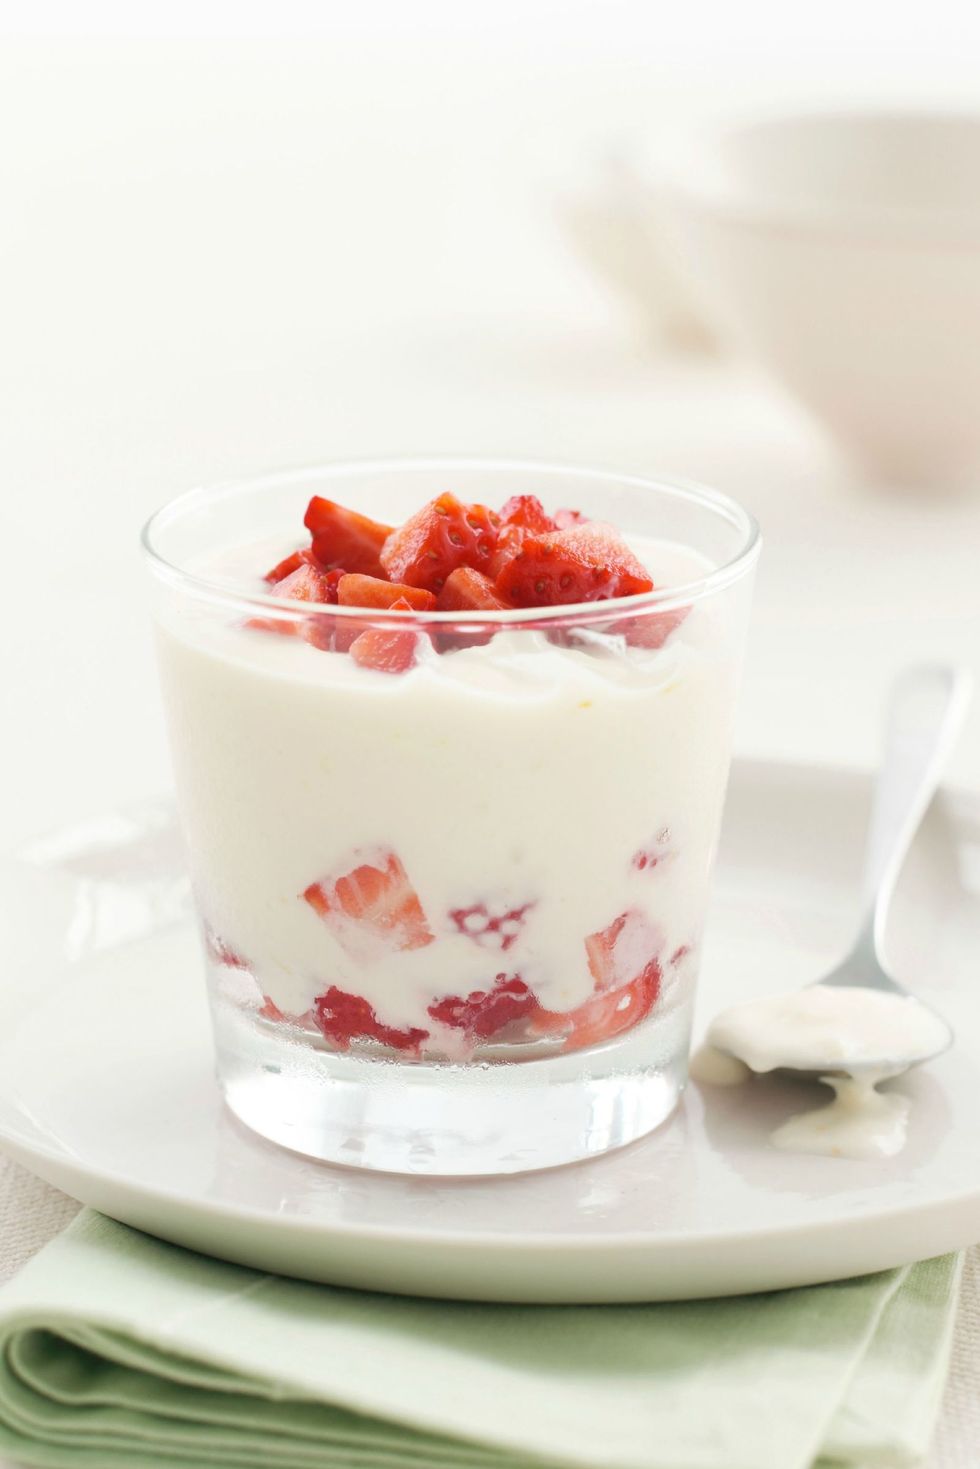 <p>Yogurt sounds like a smart breakfast choice: You'll get protein, calcium, and an array of good bacteria for digestion and immunity. But five spoonfuls of a sugary, flavored nonfat cup isn't going to make you feel as satisfied as you would if you were chewing something with more texture, says Blatner. Add a few chopped walnuts on top so you'll have something to chew, as <a href="http://www.ncbi.nlm.nih.gov/pubmed/24857719">research shows</a> chomping down bumps up the fullness factor. Even better: Opt for the plain, two percent Greek version instead of nonfat. Not only will you avoid added sugars, but it also contains <a href="http://www.ncbi.nlm.nih.gov/pubmed/16924272">conjugated linoleic acid</a> (CLA), a healthy fat that can help promote fat loss. If it's too tart, simply add your own flavor by mixing with a bit of honey.</p>